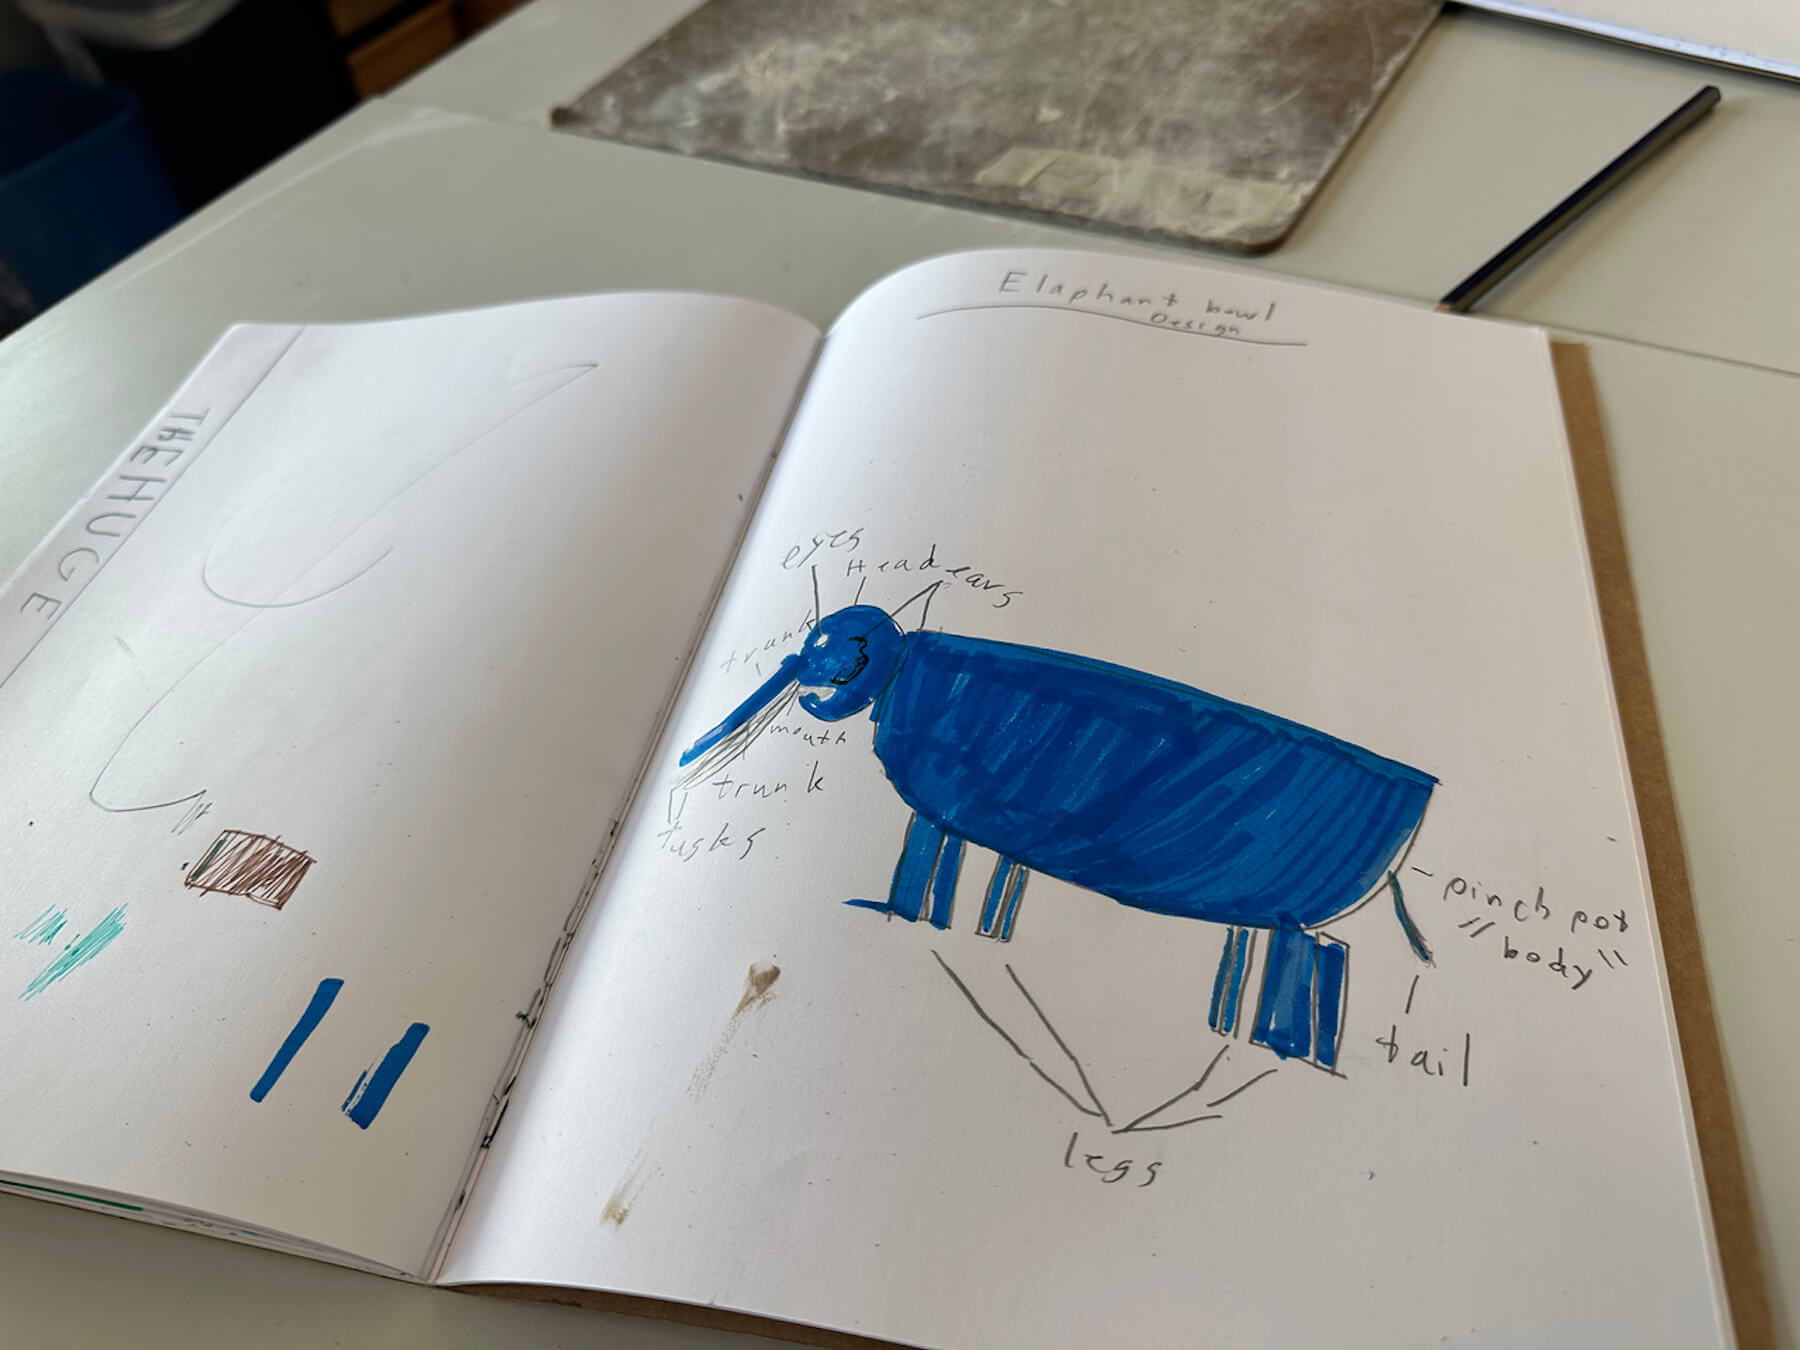 Photo of Ethical Culture student's sketchbook in which he has drawn an elephant that he will use to model his clay creation.